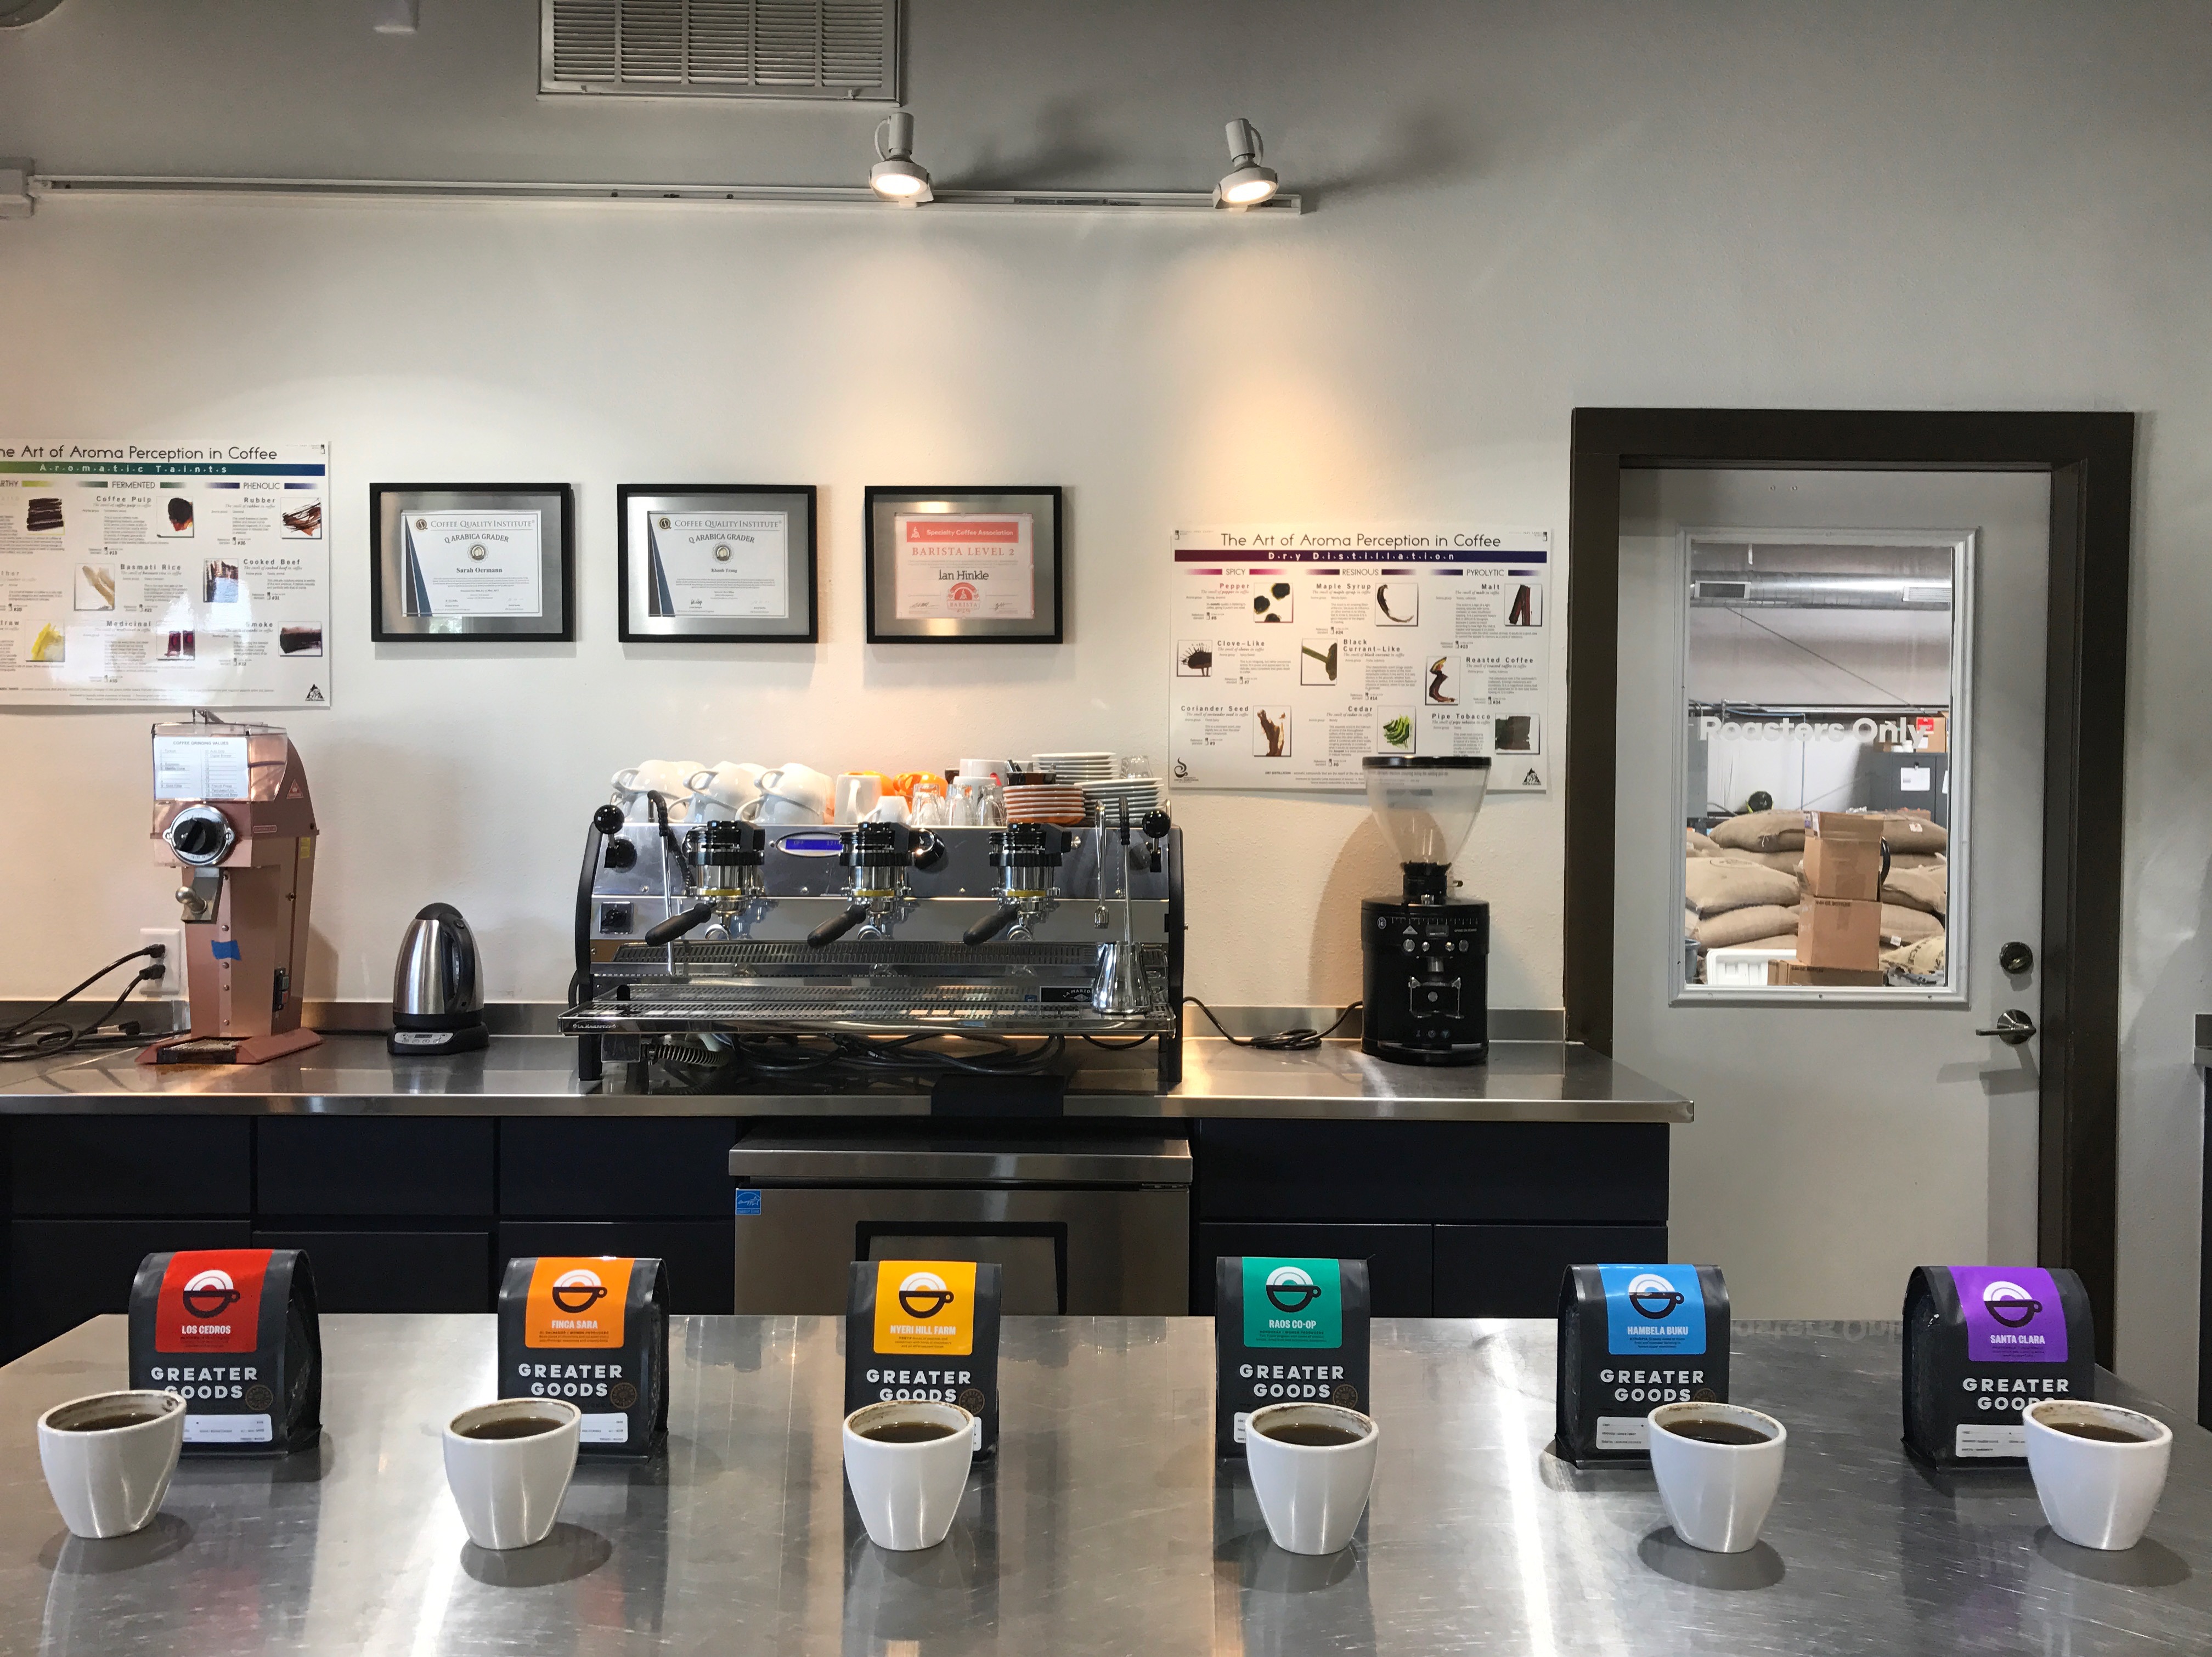 Specialty Coffee Roasted Fresh in Austin, Texas – Greater Goods